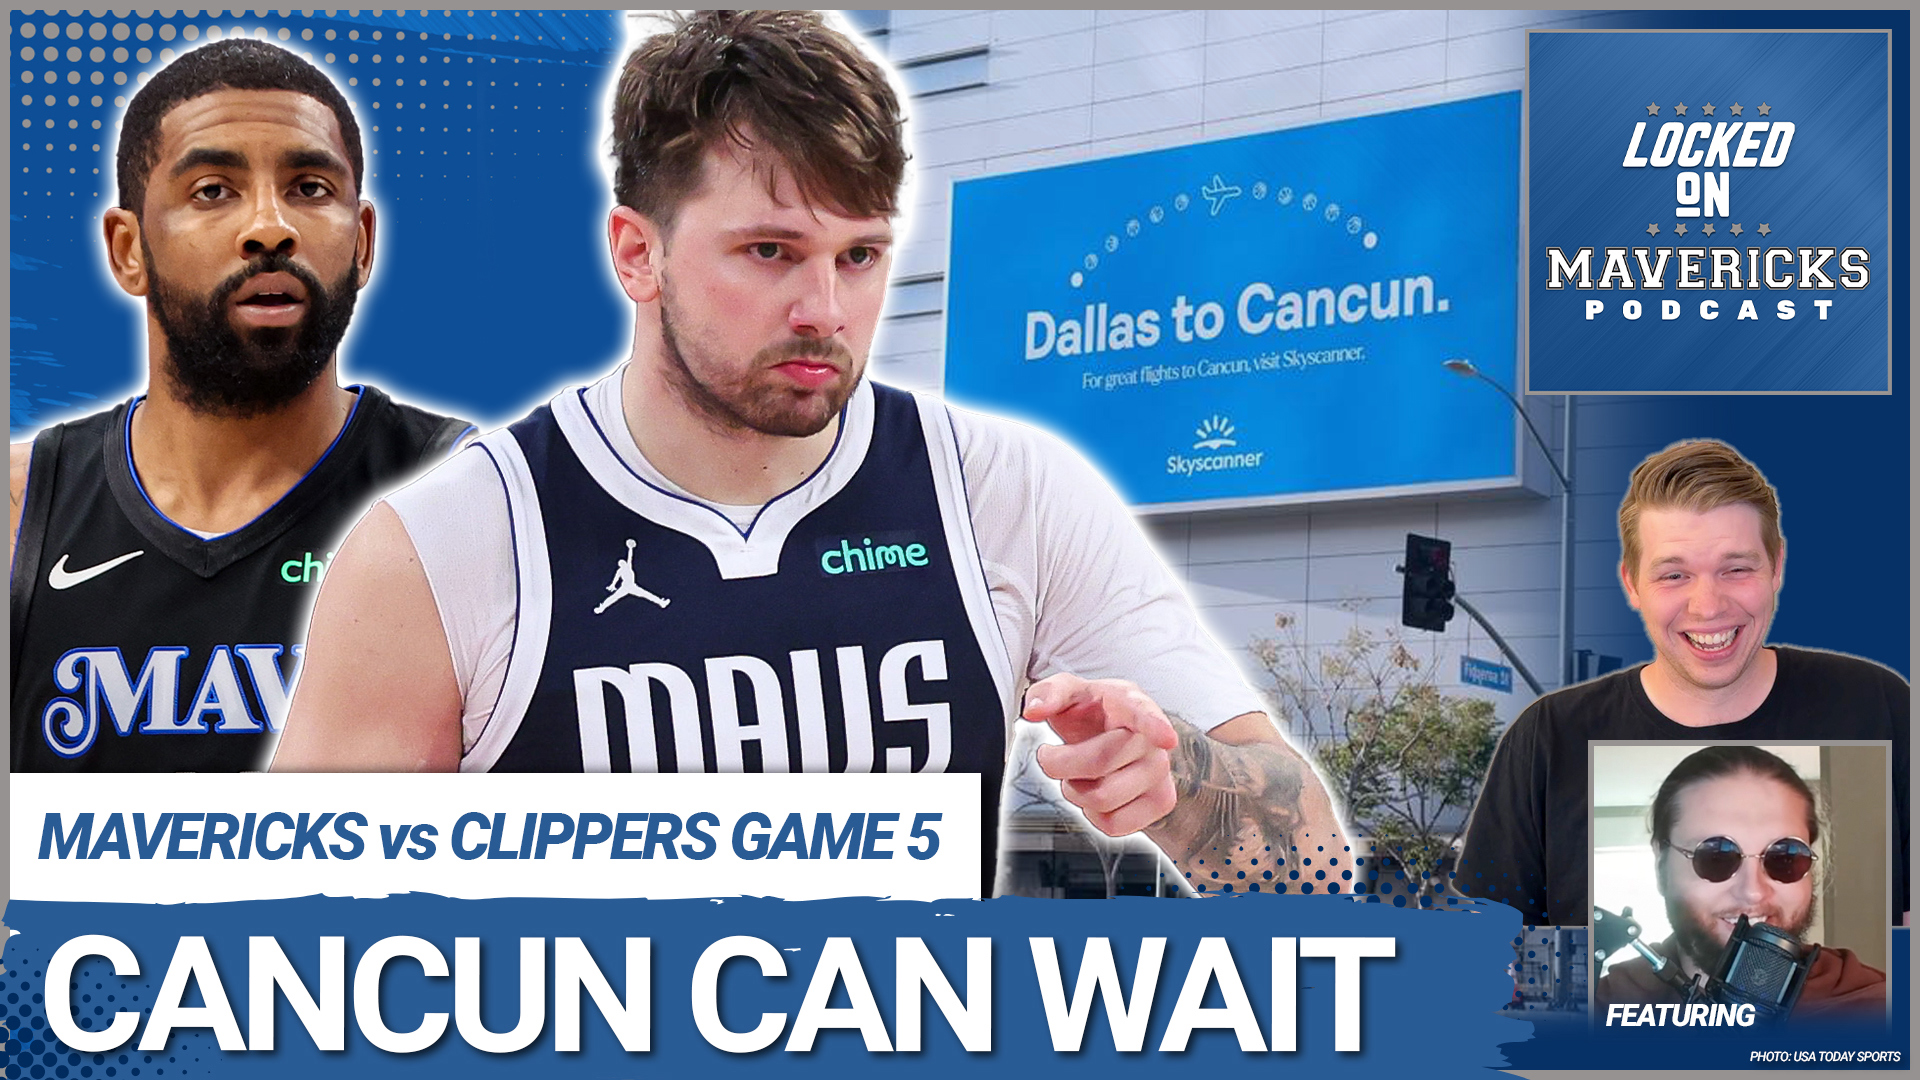 Nick Angstadt & Slightly Biased breakdown the Dallas Mavericks win over the Los Angeles Clippers where Luka Doncic goes off and the Mavs take a 3-2 lead.